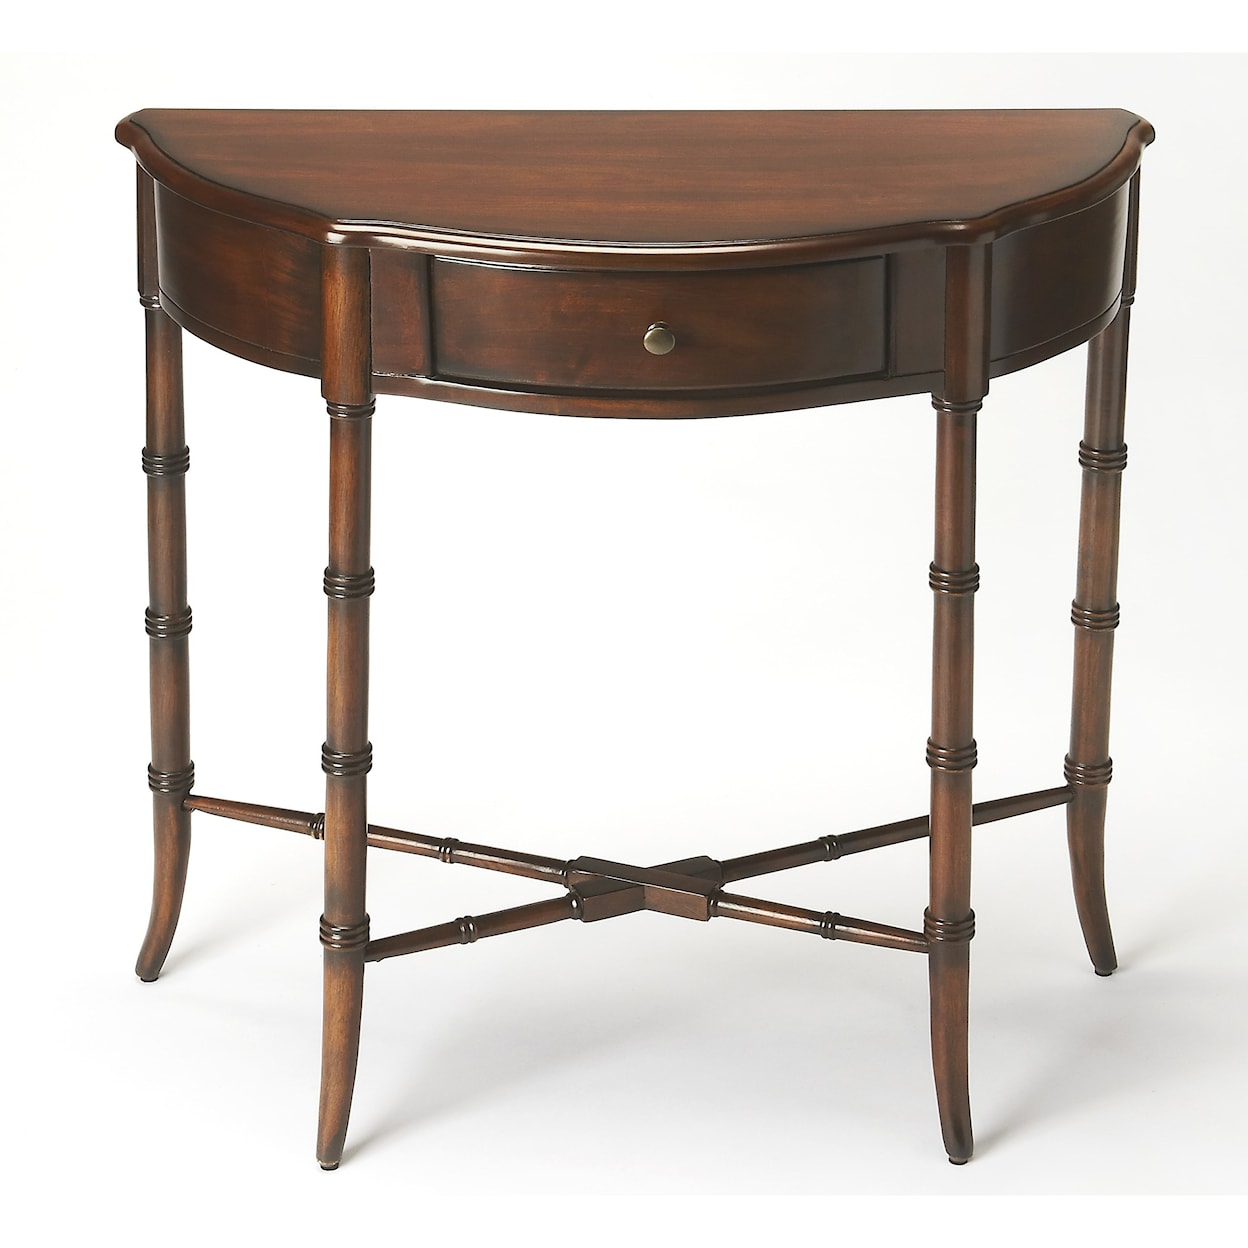 Butler Specialty Company Plantation Cherry Demilune Console Table